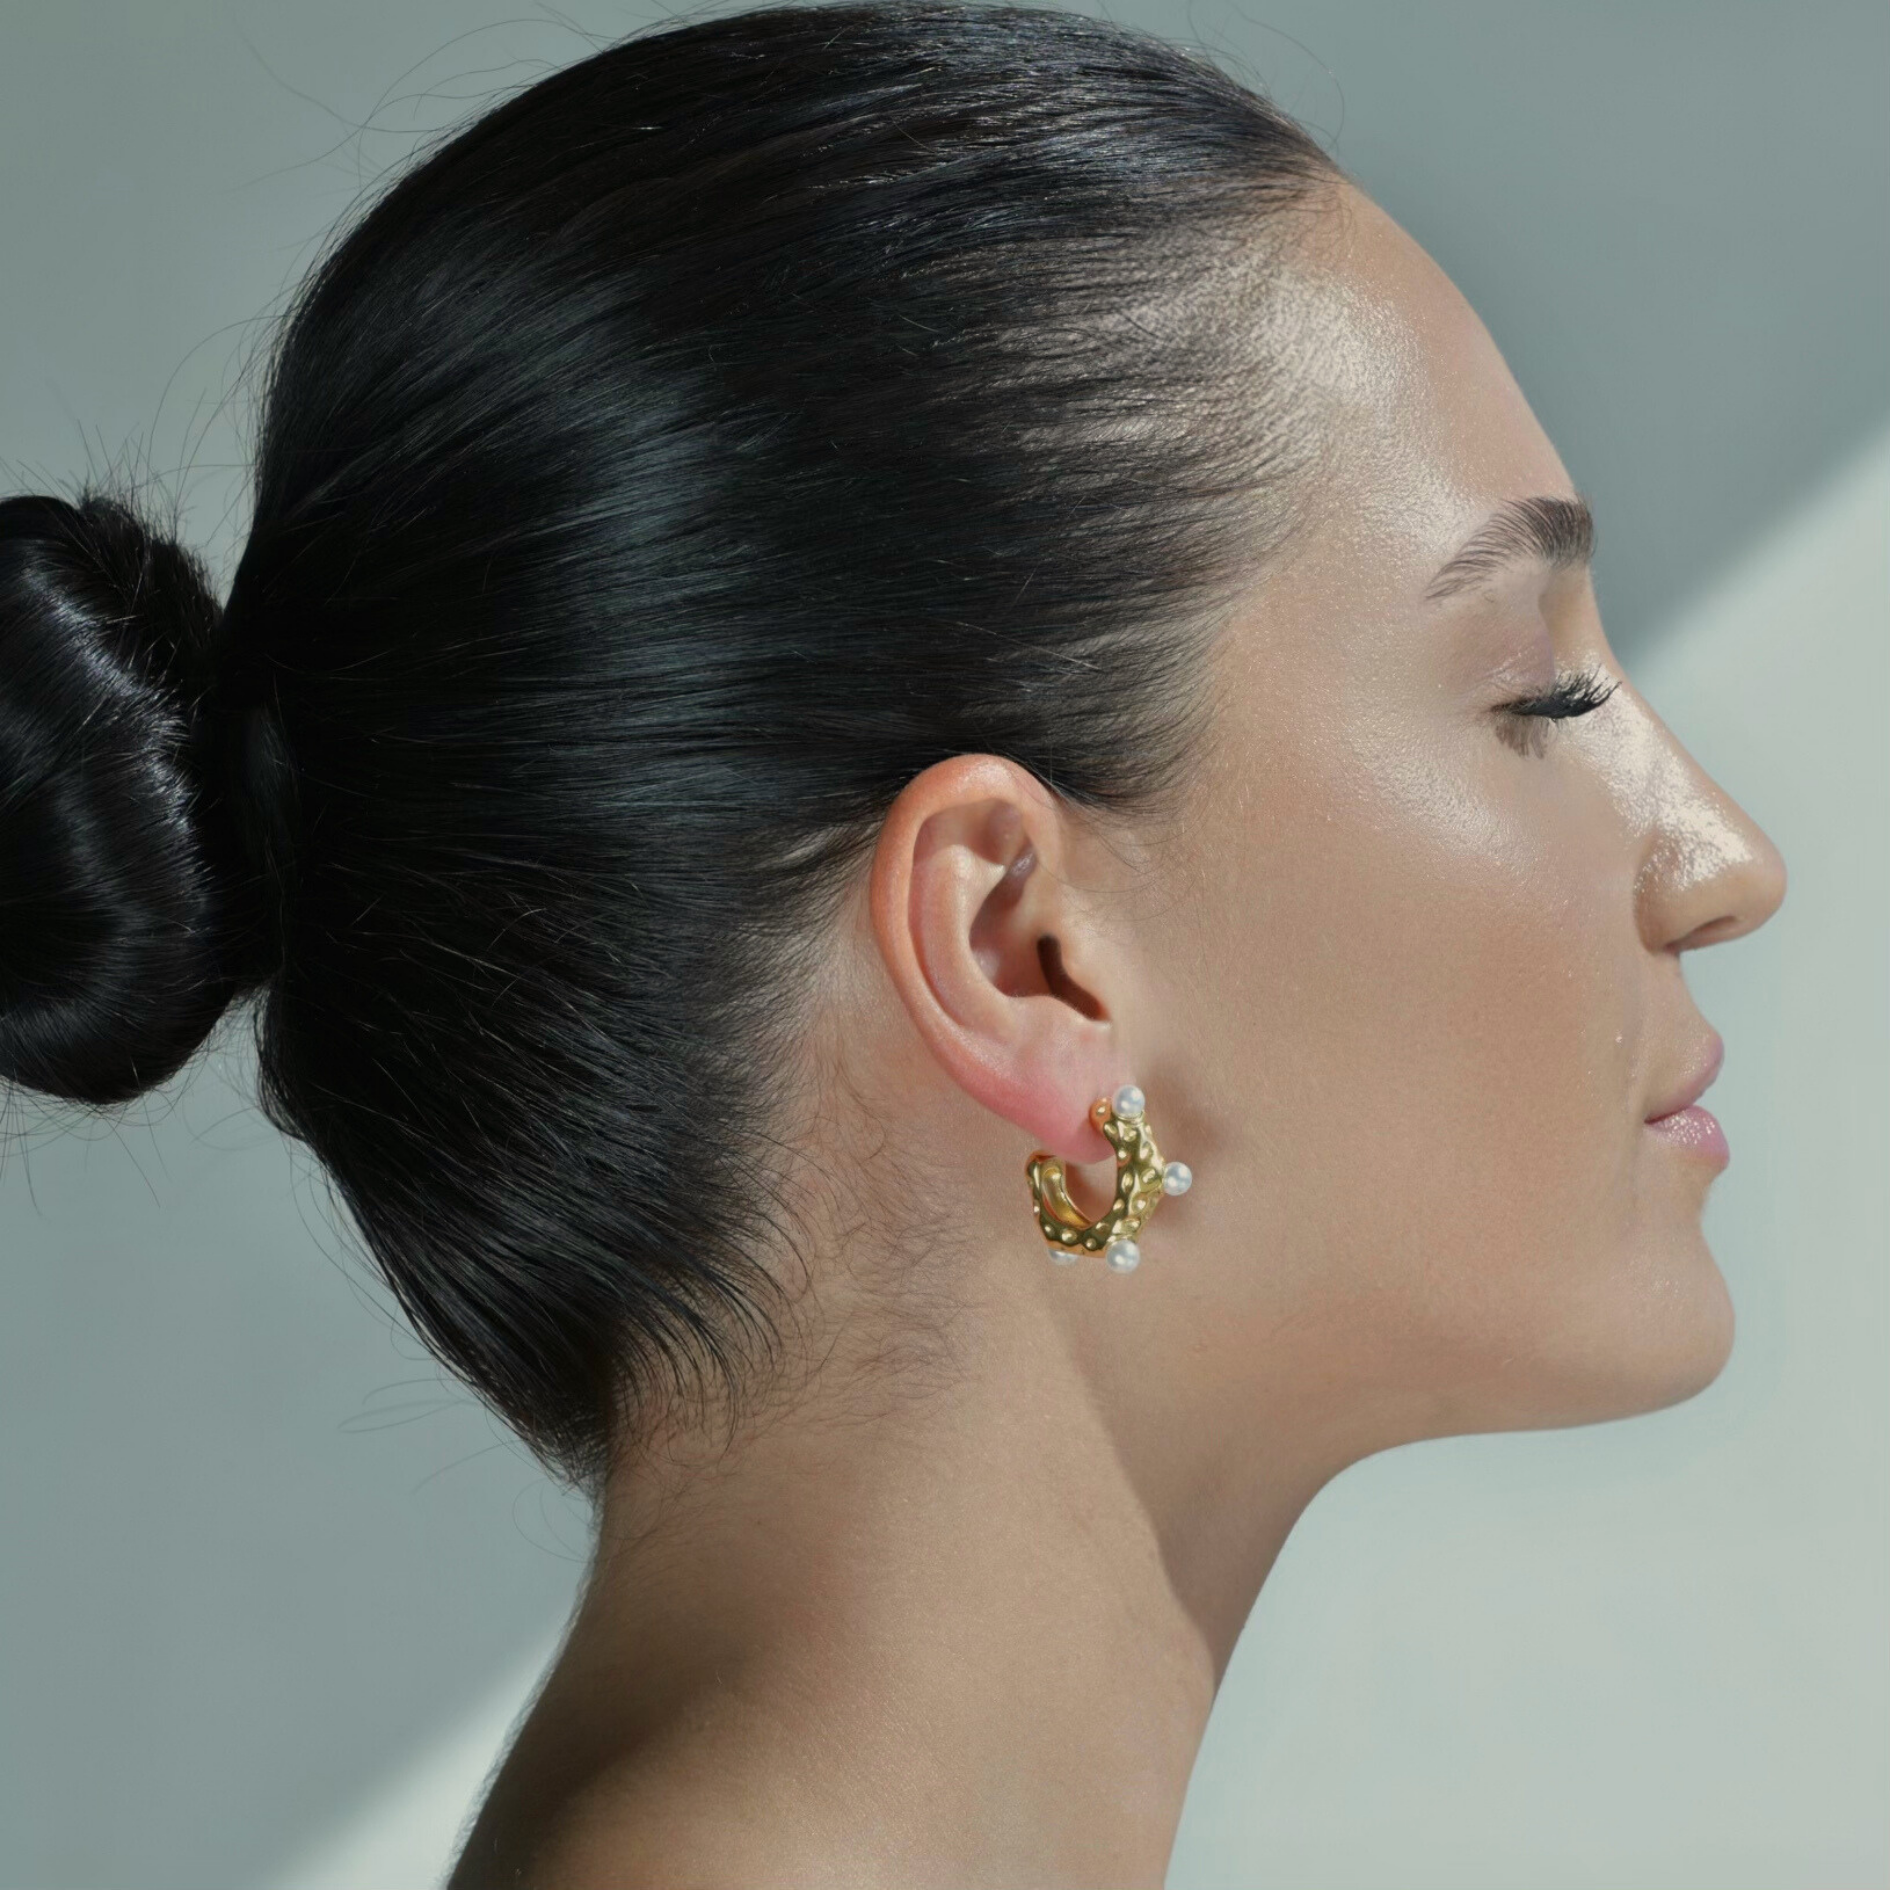 Gold Plated Half Hoop Earrings, Irregular shape resembling the water drops on a dune desert surface, white pearls added in every earring.